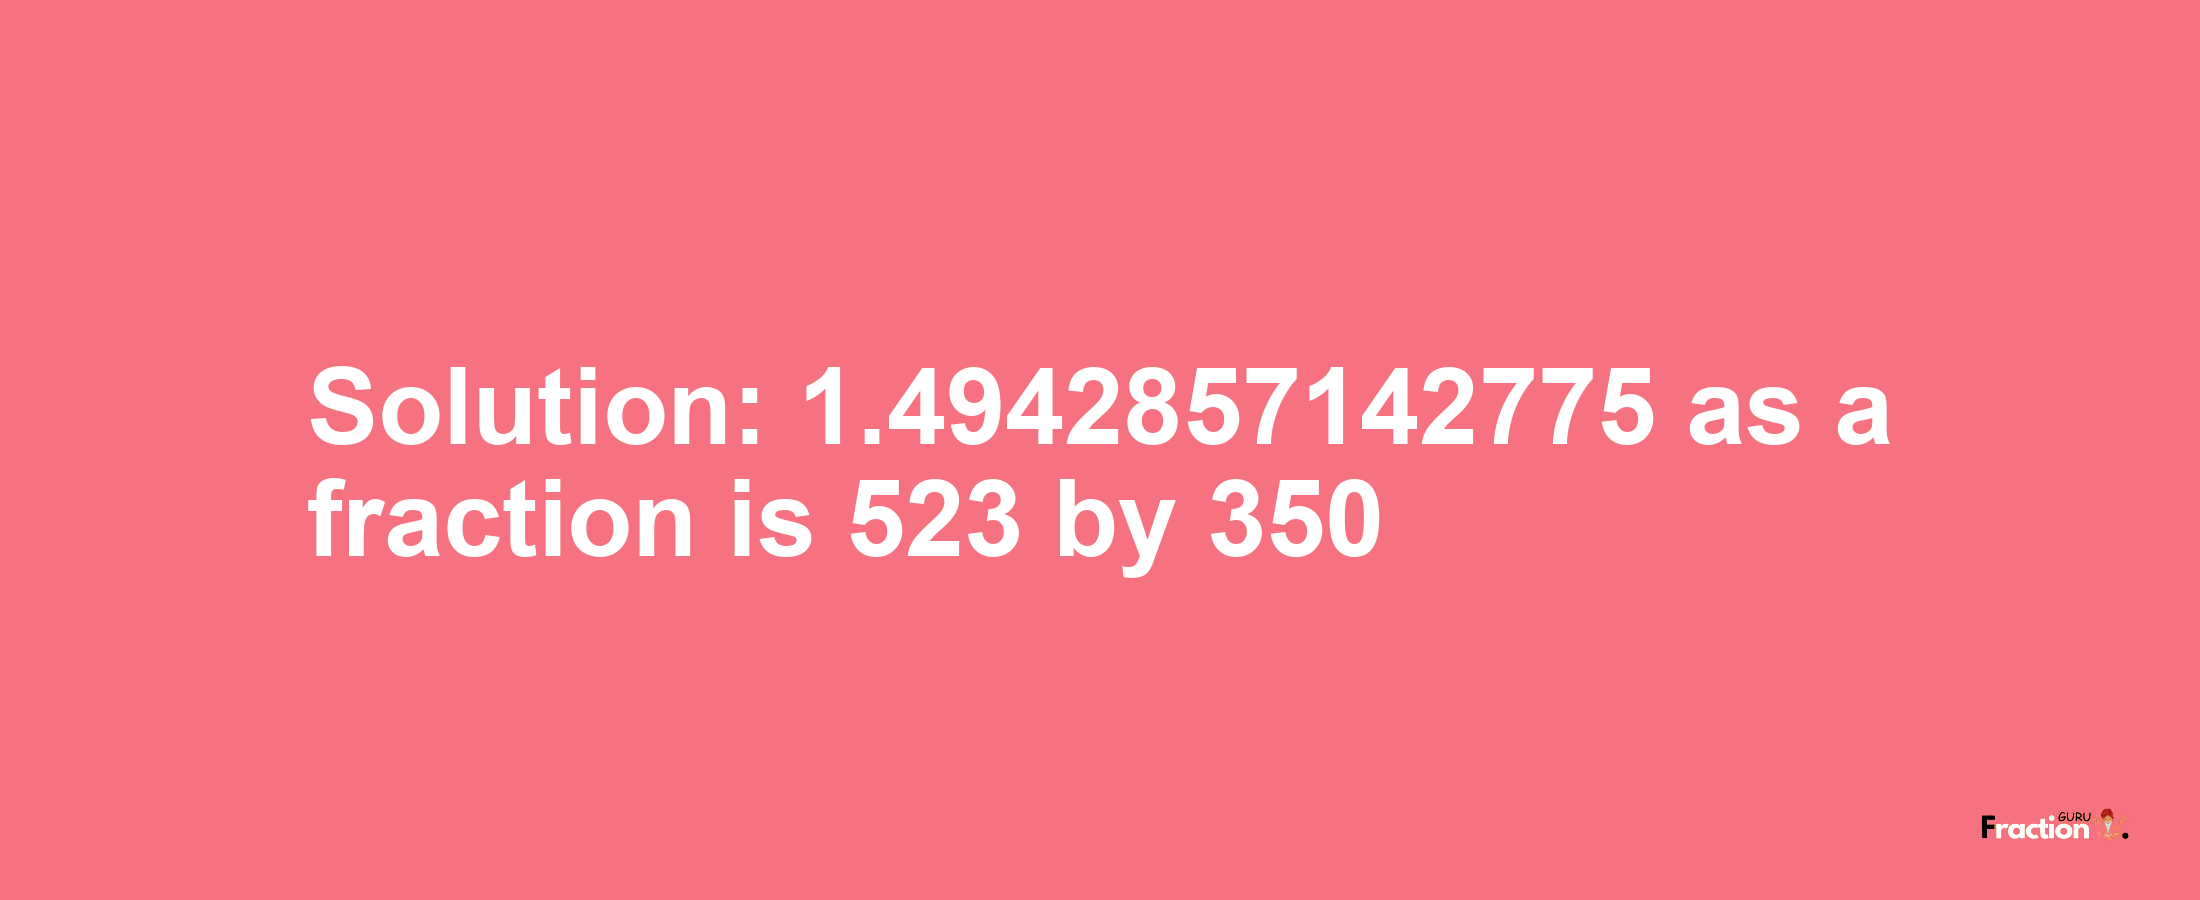 Solution:1.4942857142775 as a fraction is 523/350